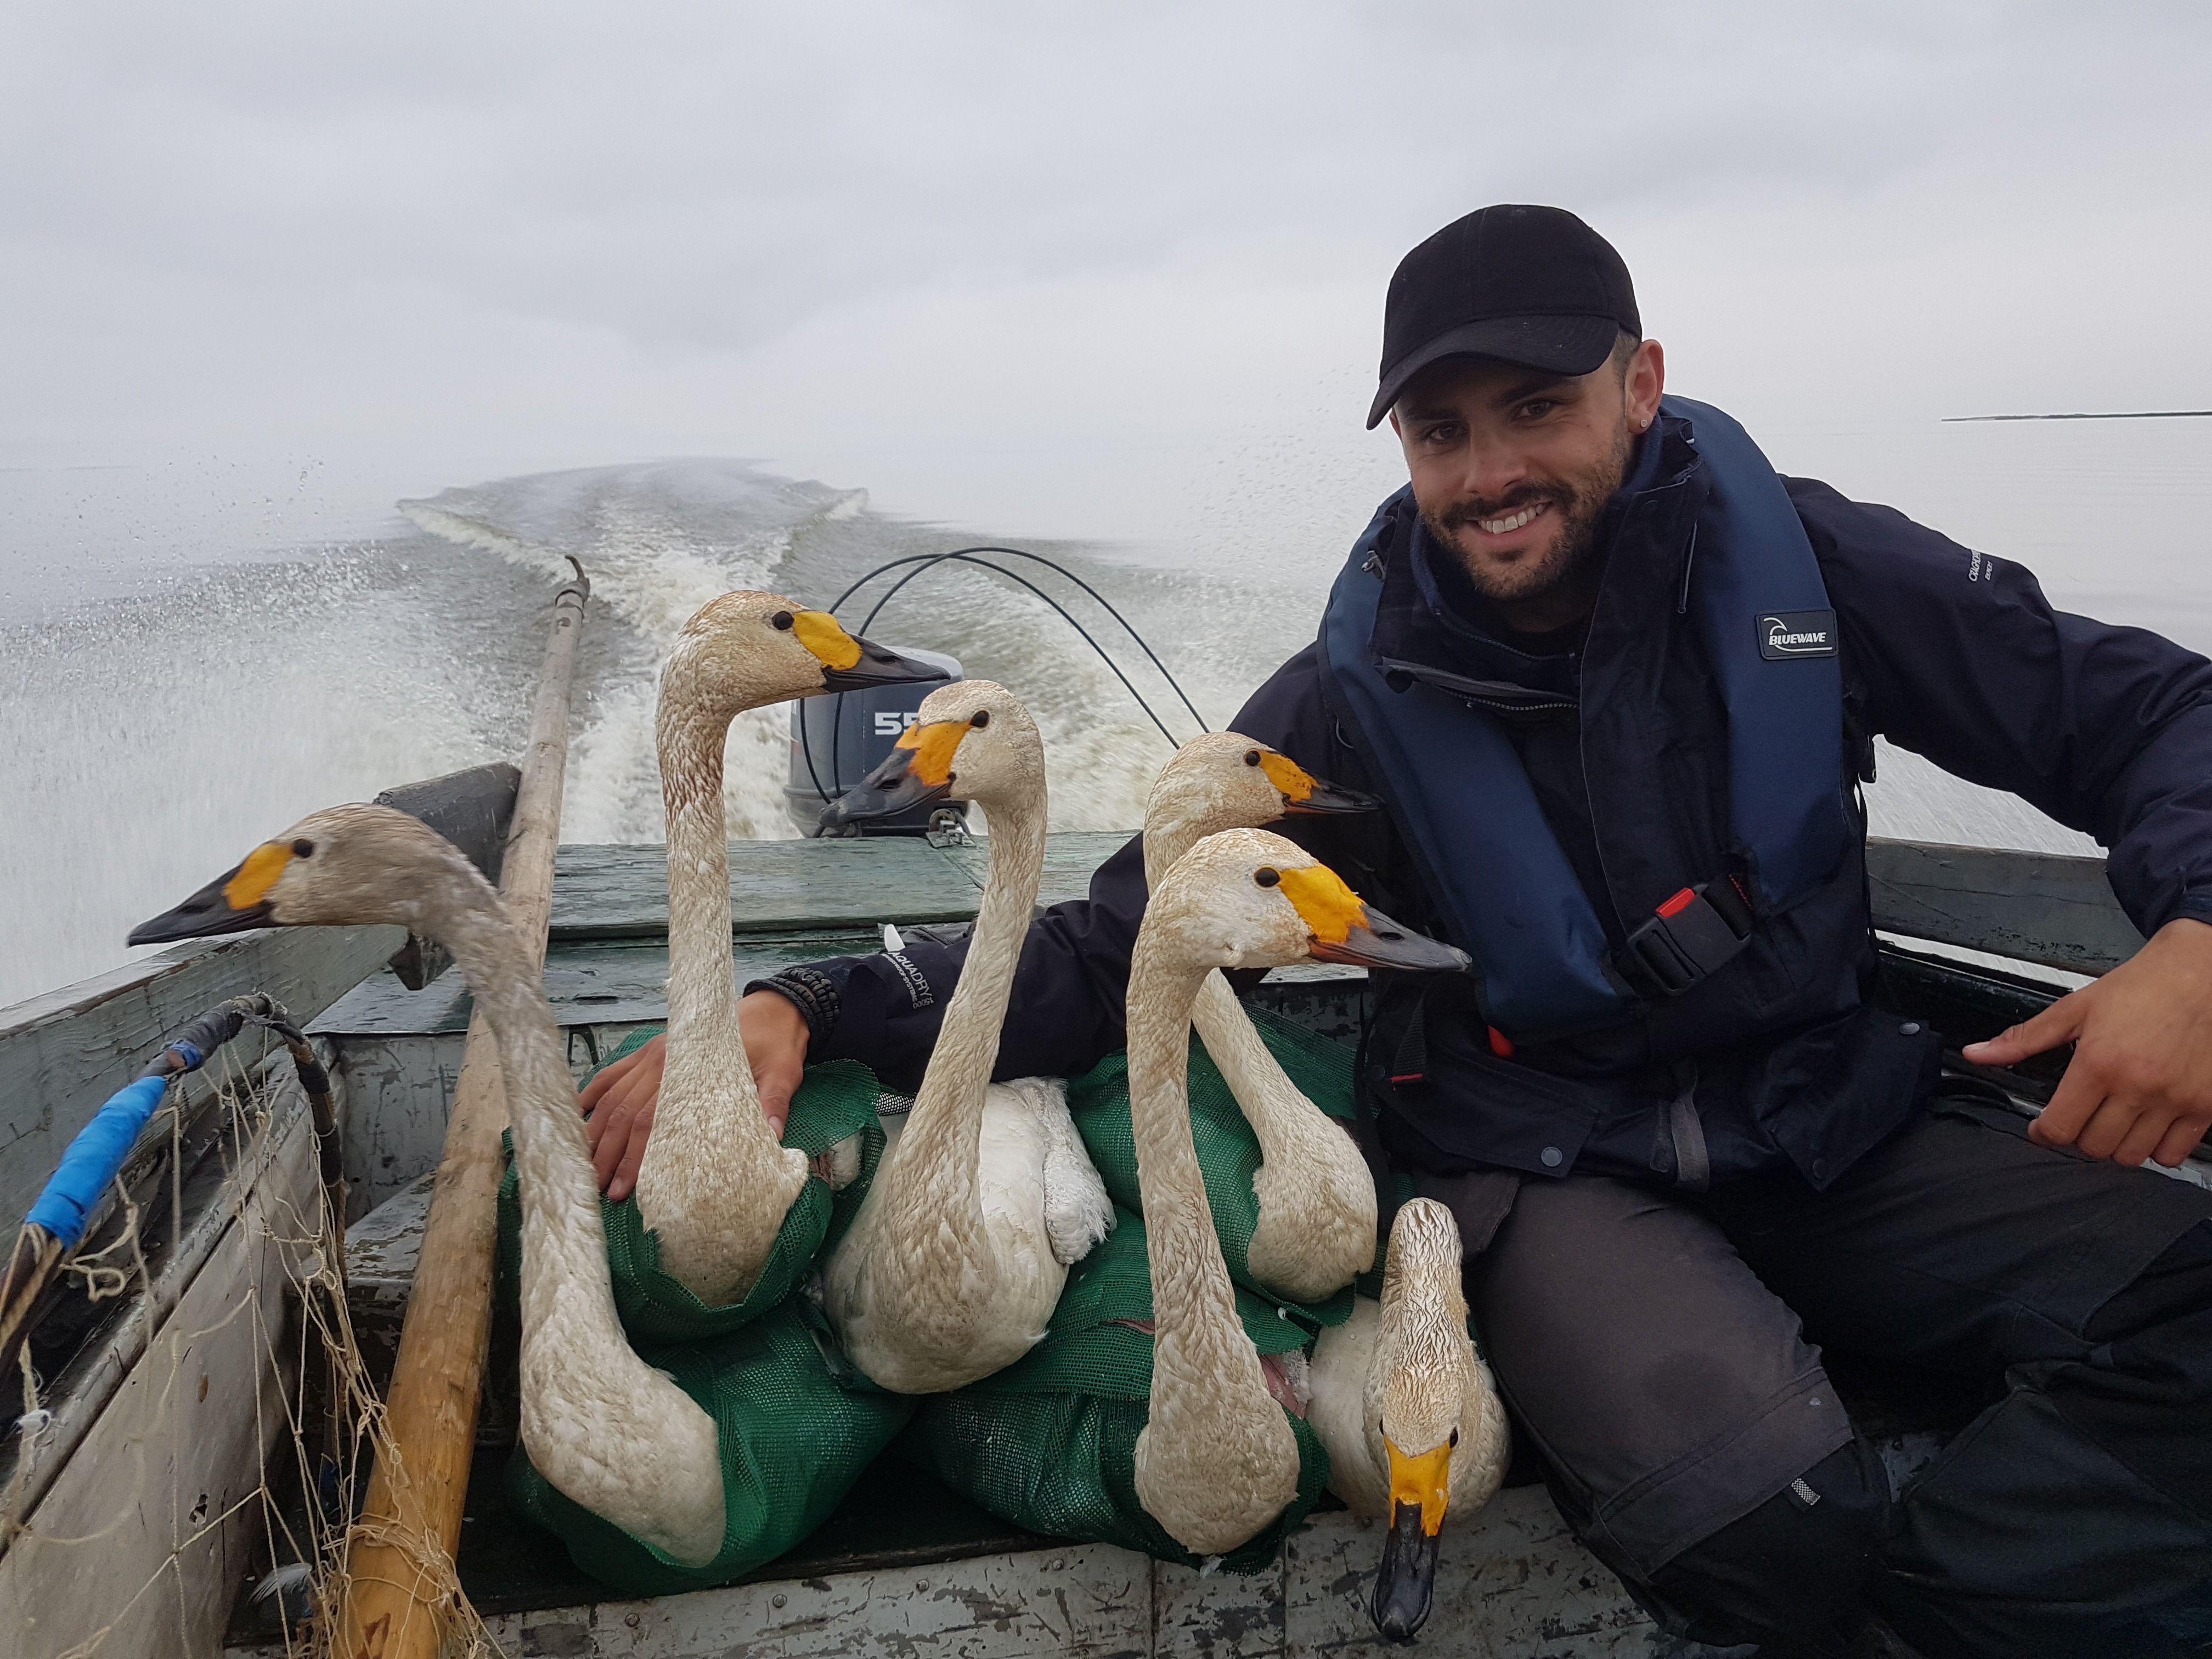 Swans with a Sun Logo - Wildfowl warden works to save the swans | Sun FM Radio